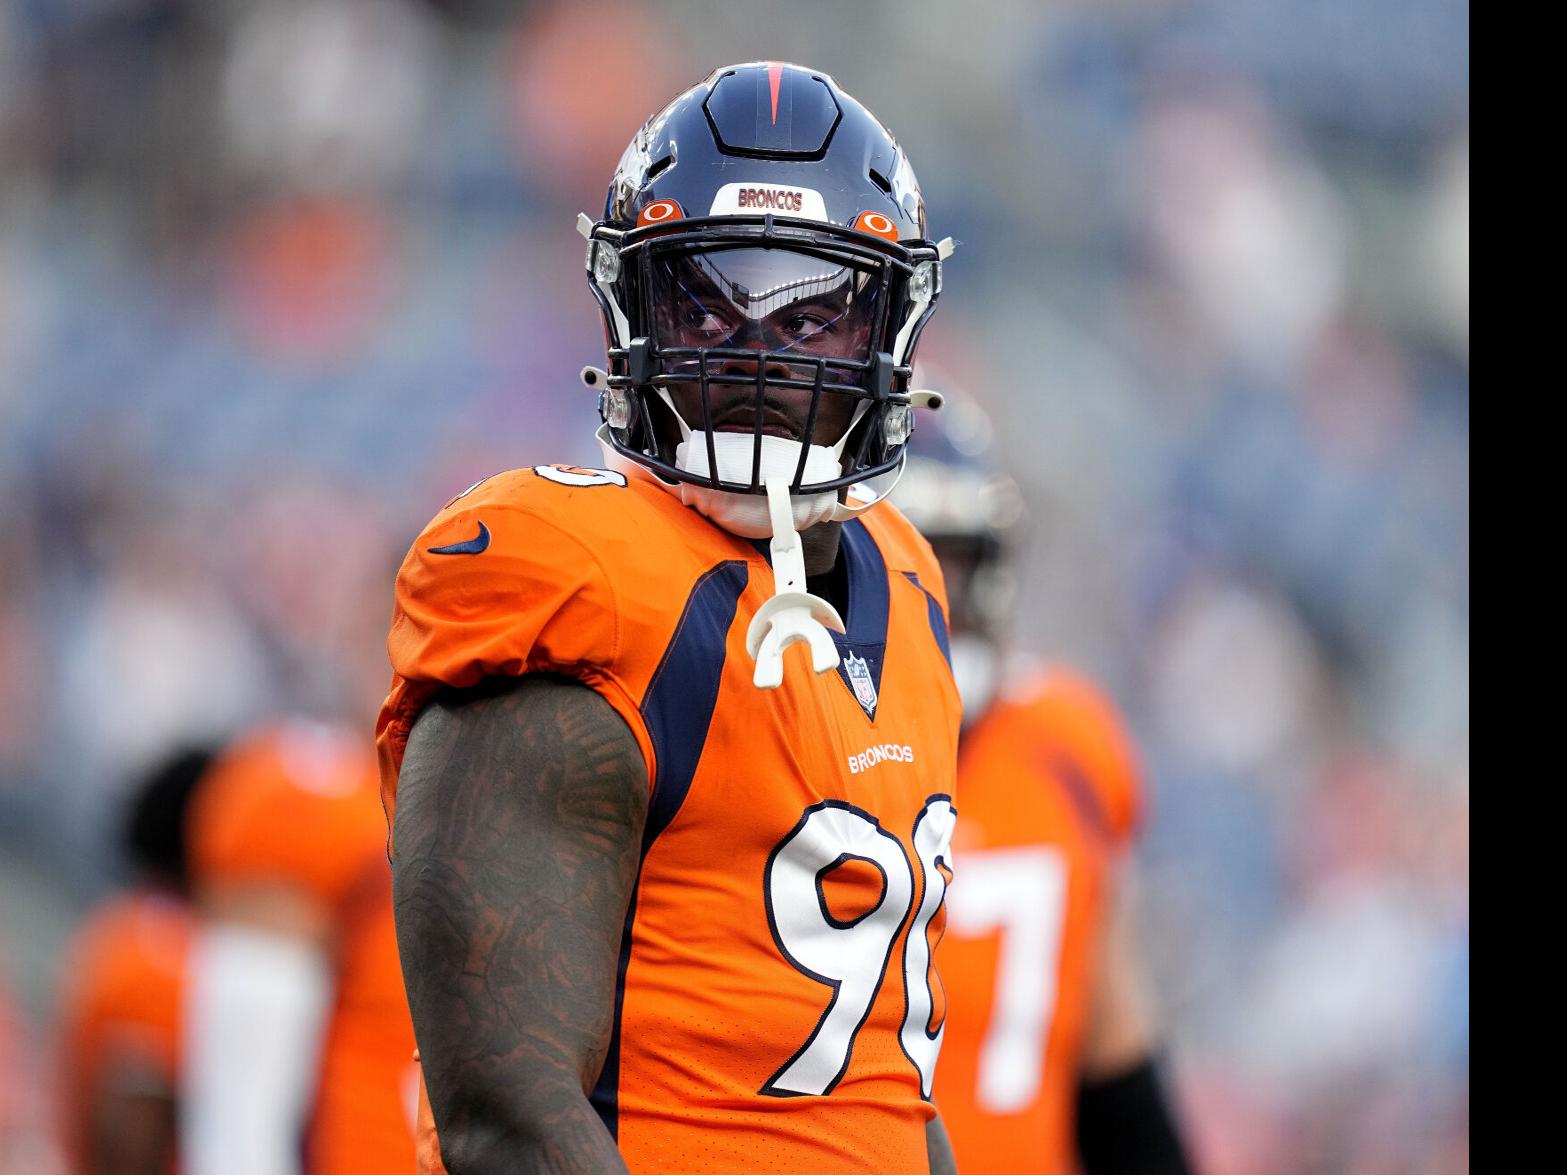 For DeShawn Williams making the Broncos' 53-man roster is dream